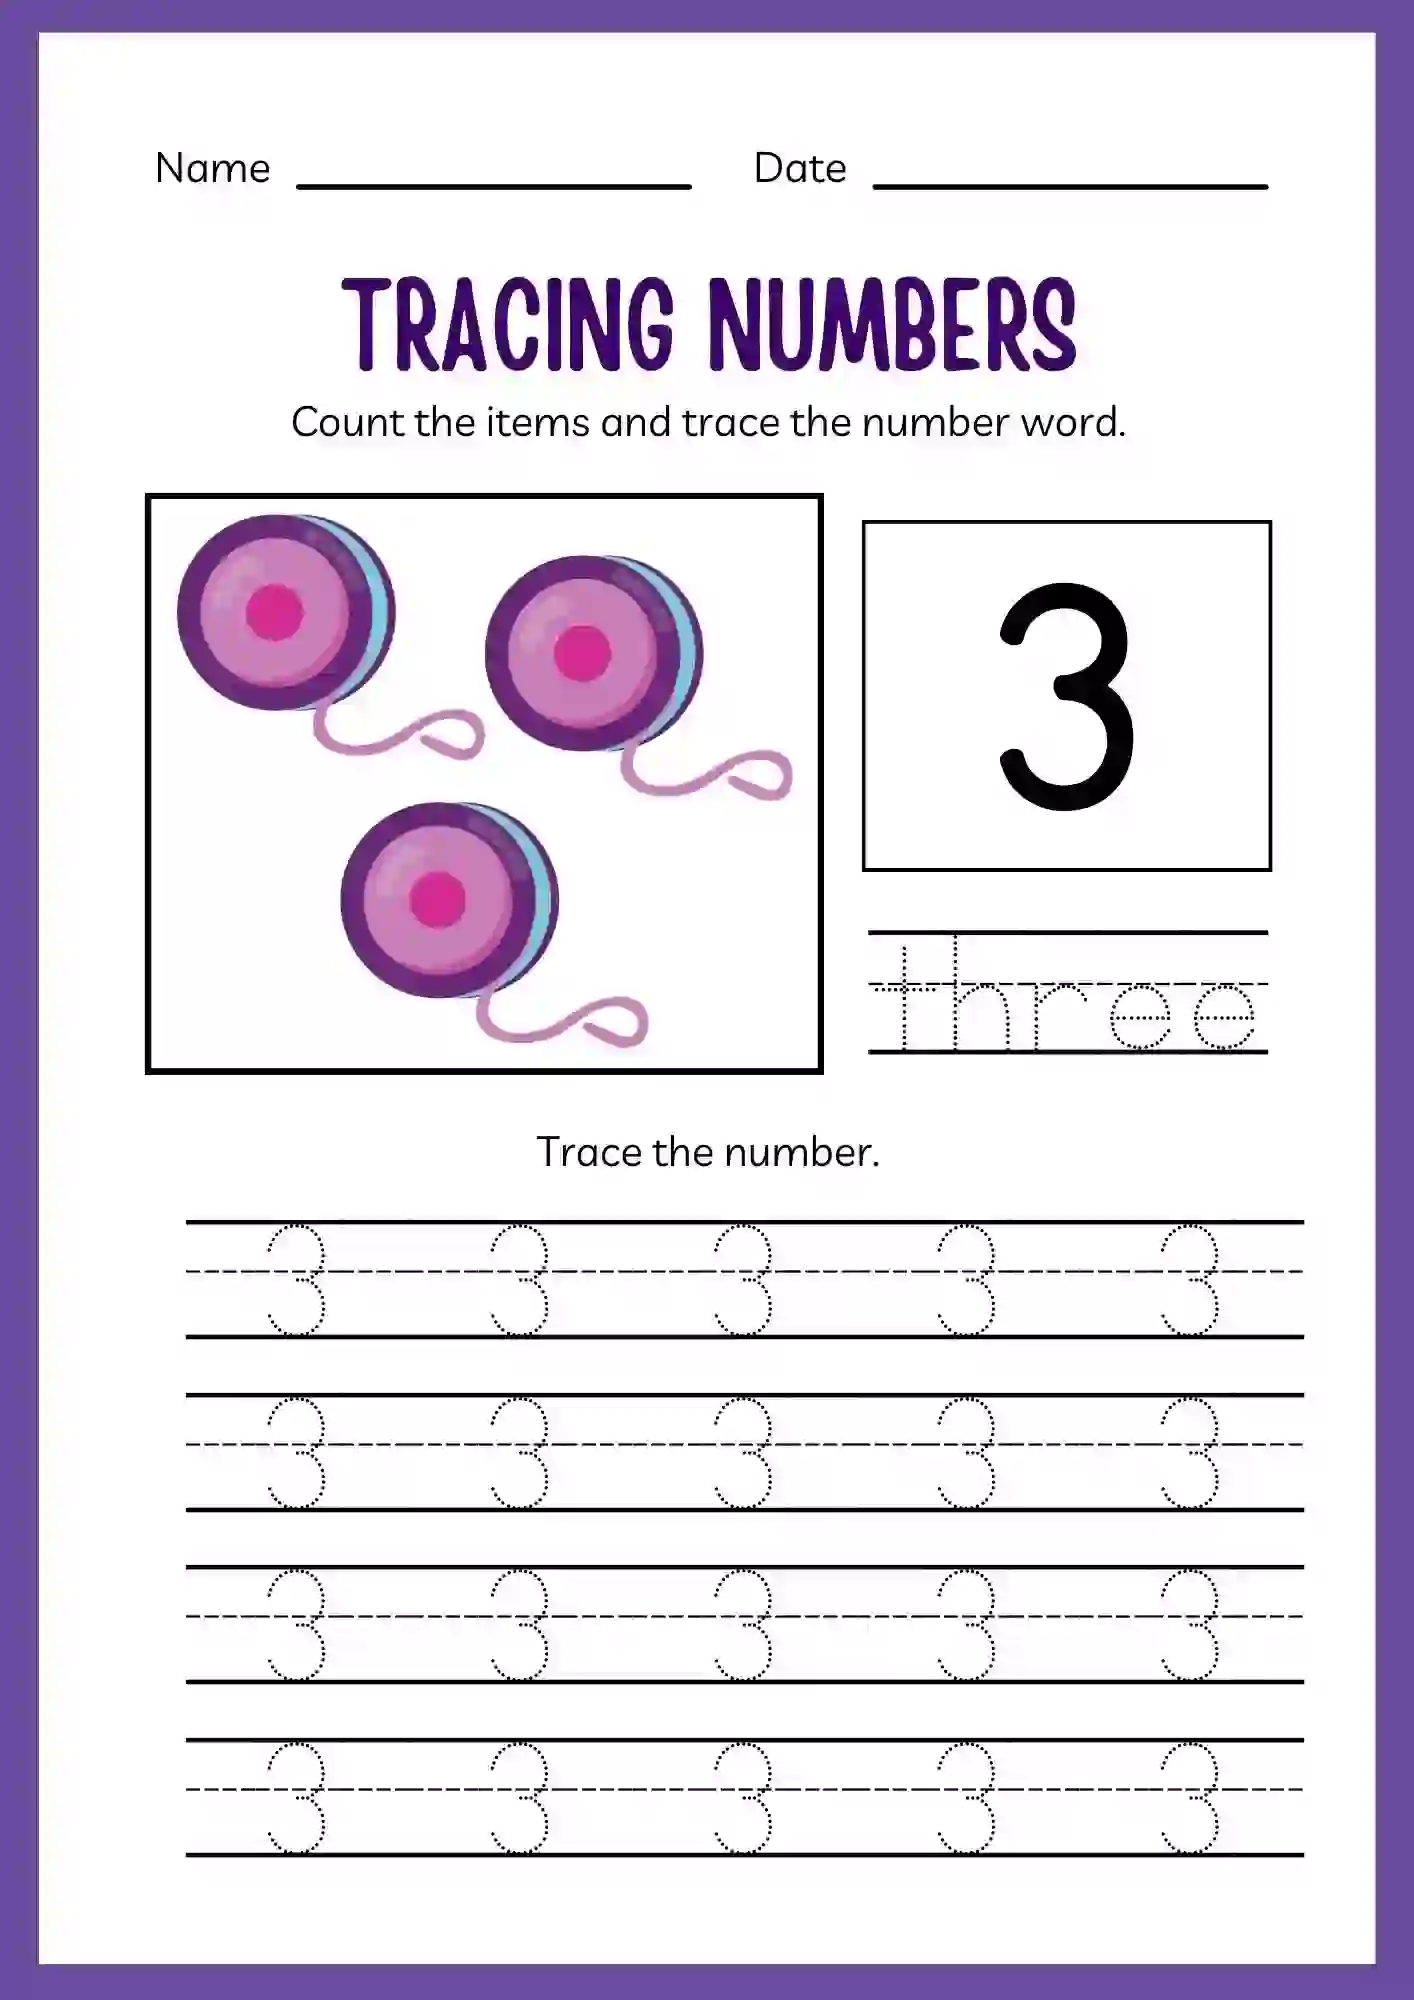 Number Tracing Worksheets 1 to 20 (Number 3 tracing sheet)